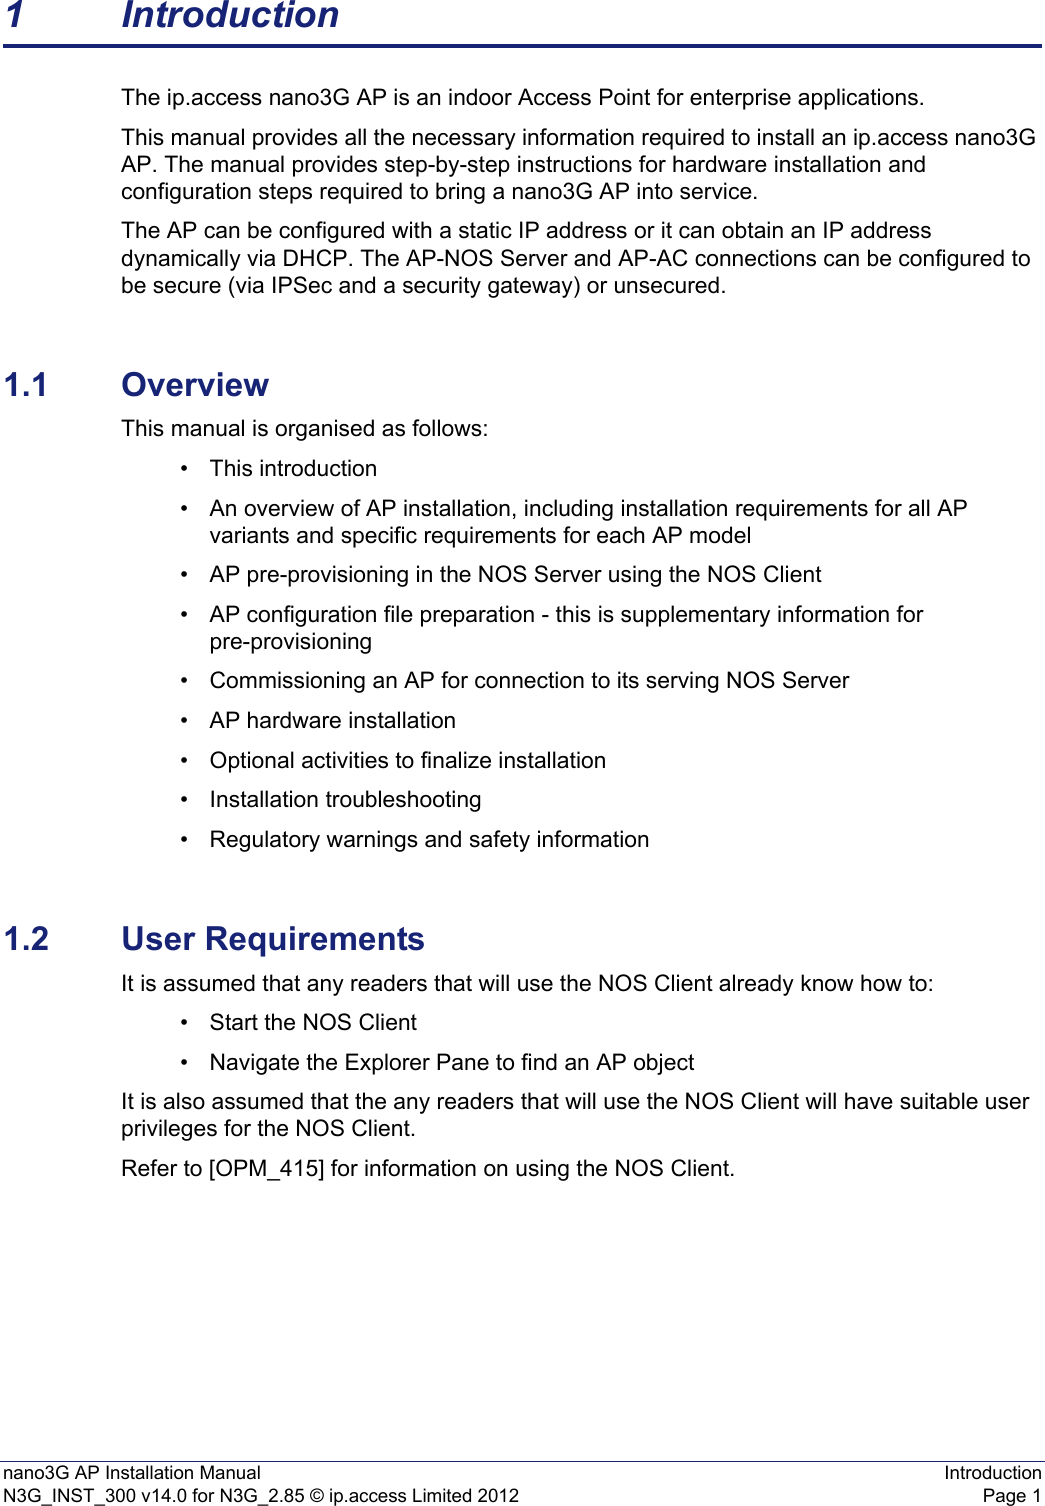 nano3G AP Installation Manual IntroductionN3G_INST_300 v14.0 for N3G_2.85 © ip.access Limited 2012 Page 11 IntroductionThe ip.access nano3G AP is an indoor Access Point for enterprise applications.This manual provides all the necessary information required to install an ip.access nano3G AP. The manual provides step-by-step instructions for hardware installation and configuration steps required to bring a nano3G AP into service.The AP can be configured with a static IP address or it can obtain an IP address dynamically via DHCP. The AP-NOS Server and AP-AC connections can be configured to be secure (via IPSec and a security gateway) or unsecured.1.1 OverviewThis manual is organised as follows:• This introduction• An overview of AP installation, including installation requirements for all AP variants and specific requirements for each AP model • AP pre-provisioning in the NOS Server using the NOS Client• AP configuration file preparation - this is supplementary information for pre-provisioning• Commissioning an AP for connection to its serving NOS Server • AP hardware installation• Optional activities to finalize installation• Installation troubleshooting• Regulatory warnings and safety information1.2 User RequirementsIt is assumed that any readers that will use the NOS Client already know how to:• Start the NOS Client• Navigate the Explorer Pane to find an AP object It is also assumed that the any readers that will use the NOS Client will have suitable user privileges for the NOS Client. Refer to [OPM_415] for information on using the NOS Client. 